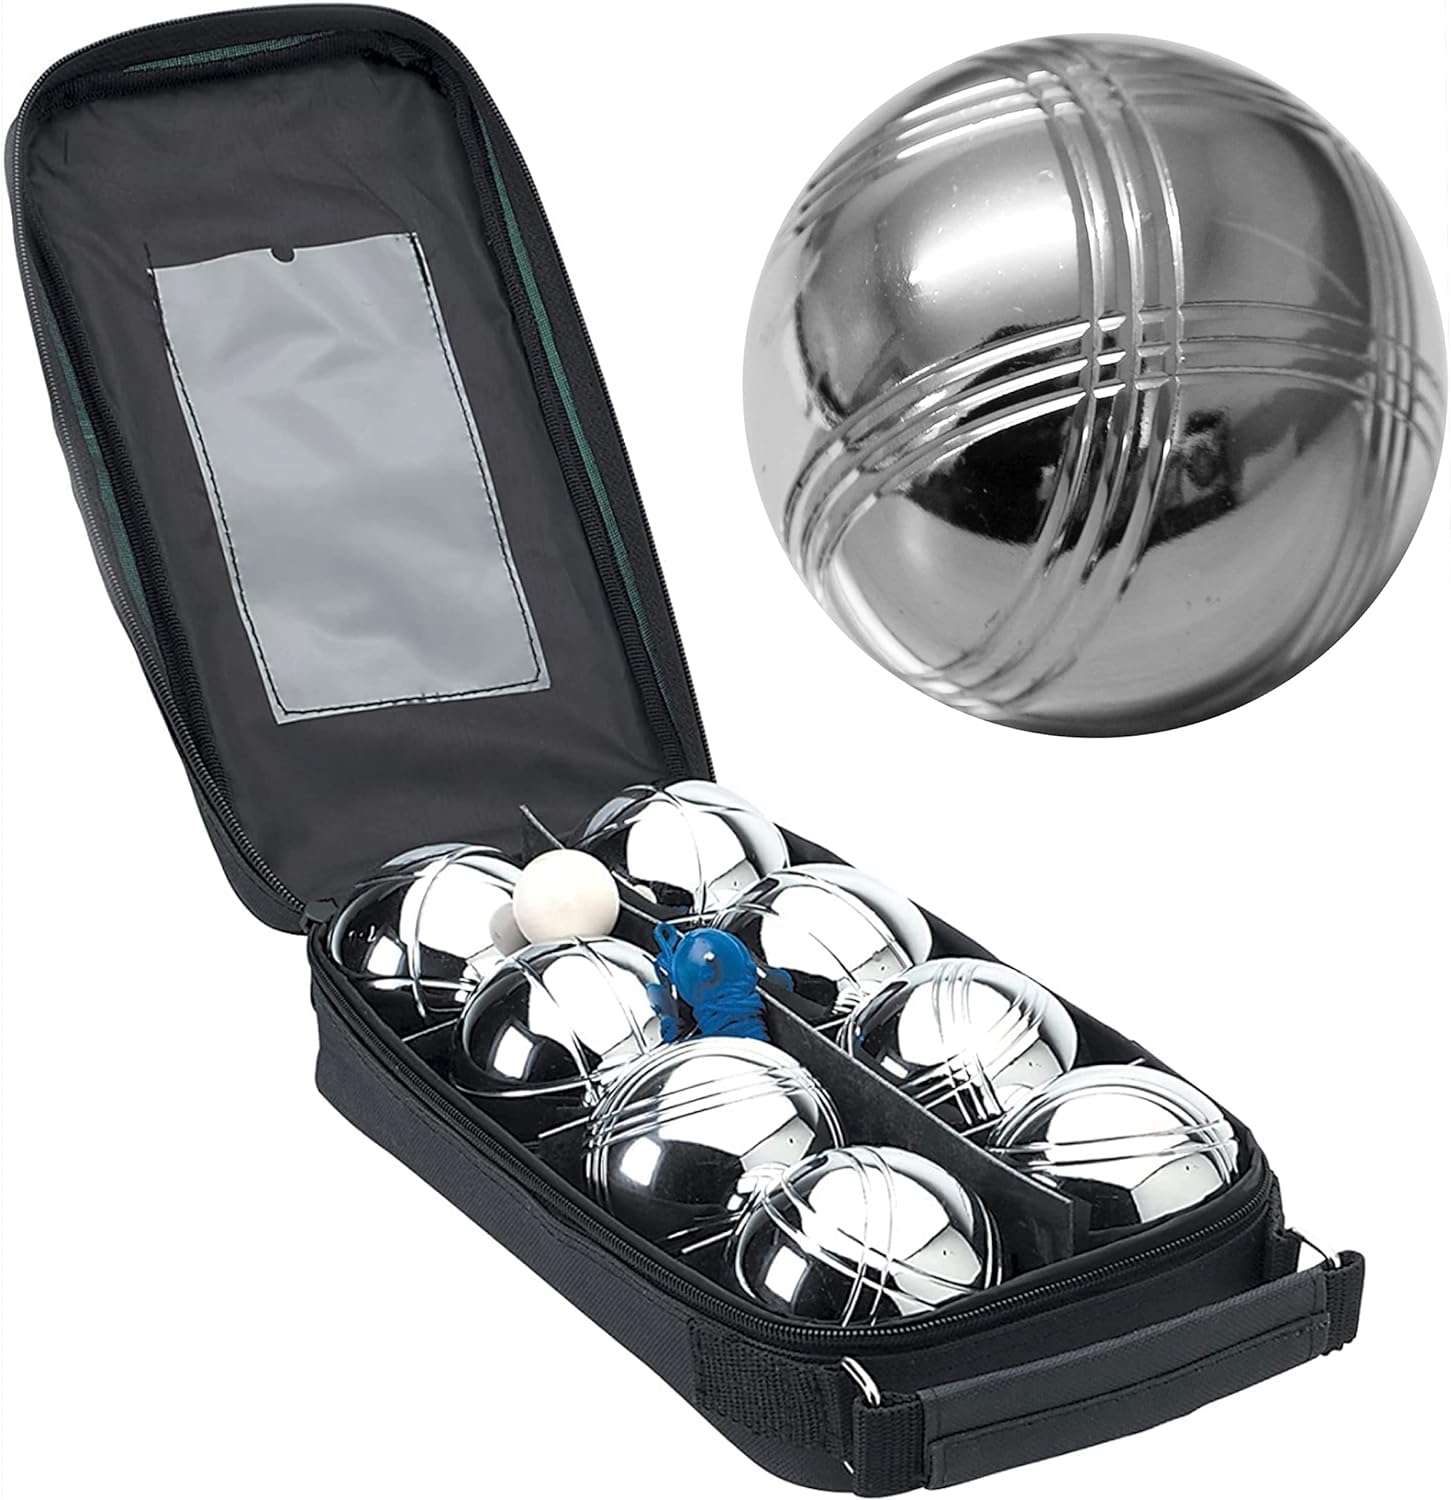 ADEPTNA Premium Pack of 8 Chrome Plated French Boules Set with Carry Case - Pétanque Jack Steel Bowls Set Games for Everyone - Outdoor Fun Activity Garden Game Entertainment for family friendss